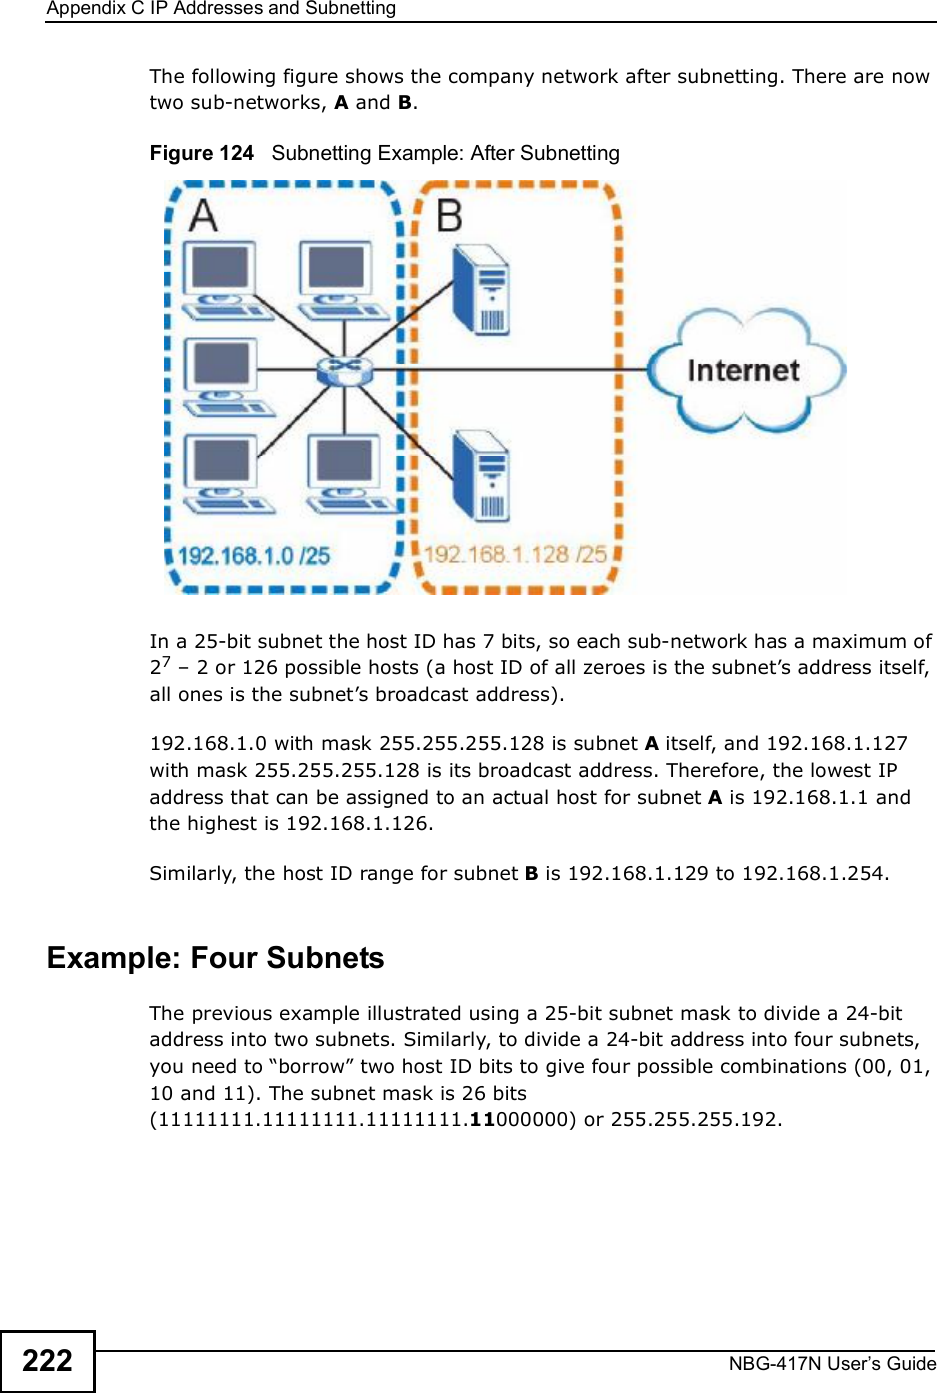 Appendix CIP Addresses and SubnettingNBG-417N User s Guide222The following figure shows the company network after subnetting. There are now two sub-networks, A and B. Figure 124   Subnetting Example: After SubnettingIn a 25-bit subnet the host ID has 7 bits, so each sub-network has a maximum of 27 $ 2 or 126 possible hosts (a host ID of all zeroes is the subnet!s address itself, all ones is the subnet!s broadcast address).192.168.1.0 with mask 255.255.255.128 is subnet A itself, and 192.168.1.127 with mask 255.255.255.128 is its broadcast address. Therefore, the lowest IP address that can be assigned to an actual host for subnet A is 192.168.1.1 and the highest is 192.168.1.126. Similarly, the host ID range for subnet B is 192.168.1.129 to 192.168.1.254.Example: Four Subnets The previous example illustrated using a 25-bit subnet mask to divide a 24-bit address into two subnets. Similarly, to divide a 24-bit address into four subnets, you need to &quot;borrow# two host ID bits to give four possible combinations (00, 01, 10 and 11). The subnet mask is 26 bits (11111111.11111111.11111111.11000000) or 255.255.255.192. 